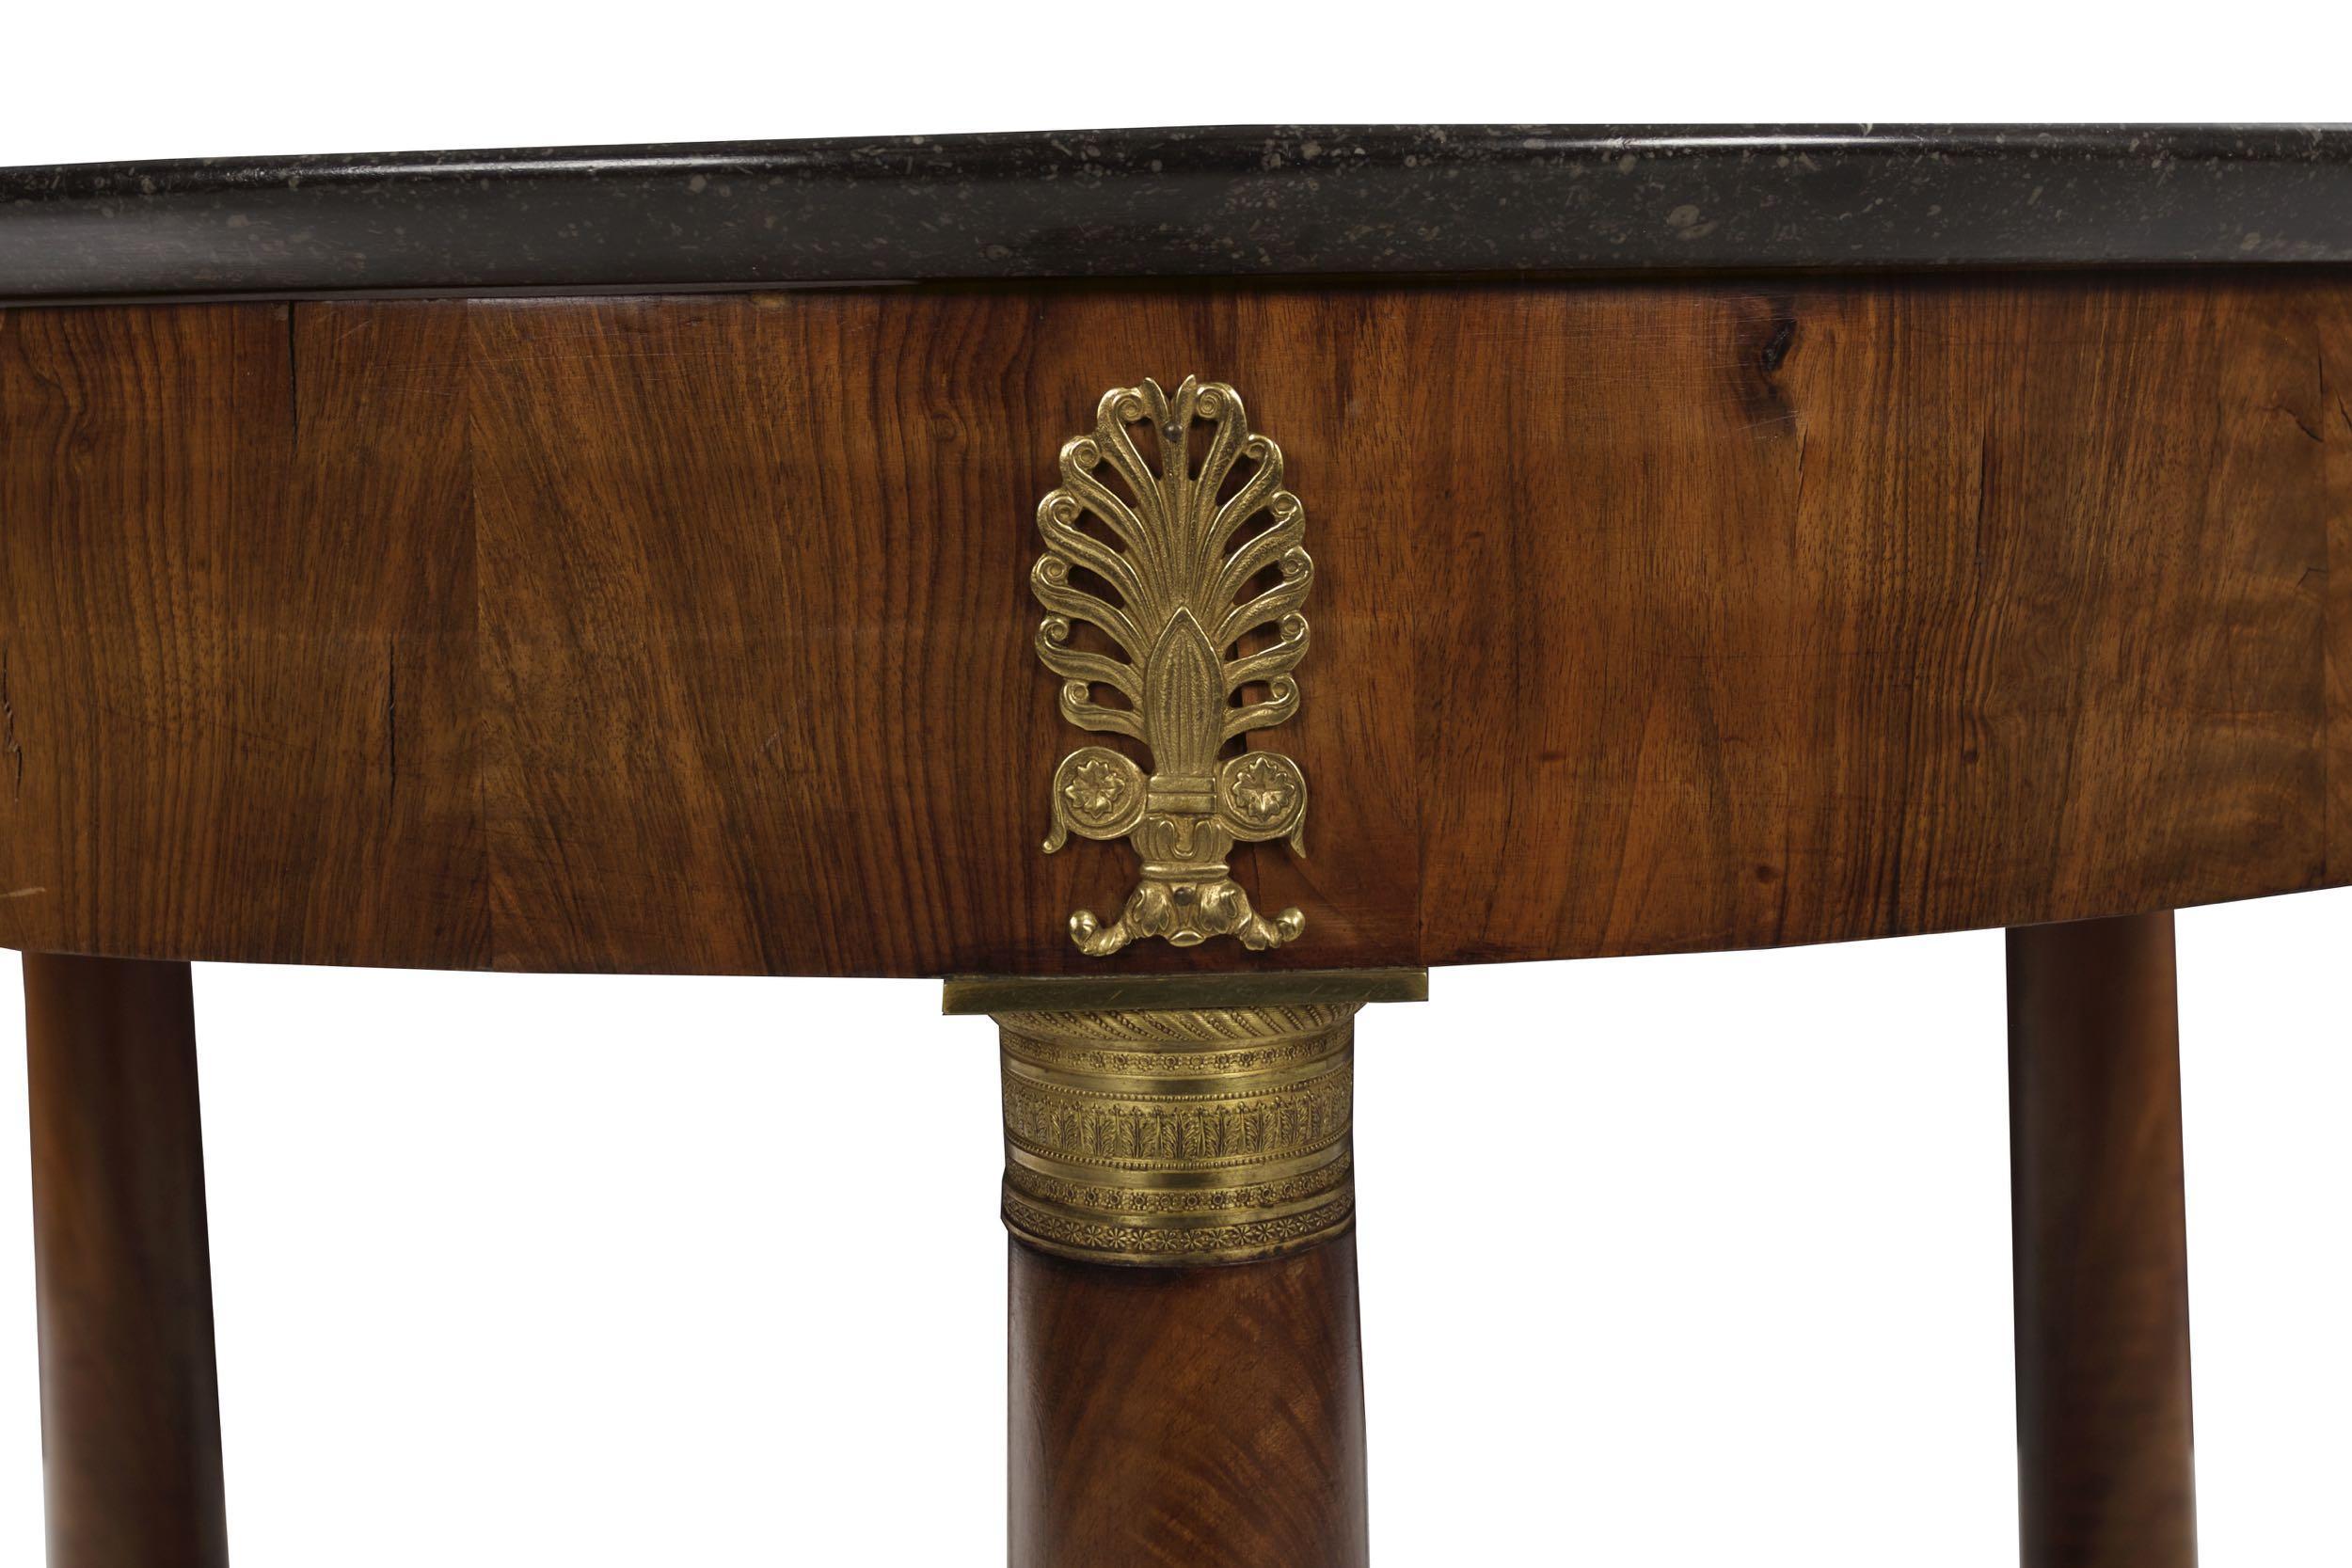 French Empire Antique Burl Walnut Center Table with Black Marble Top, circa 1815 For Sale 4